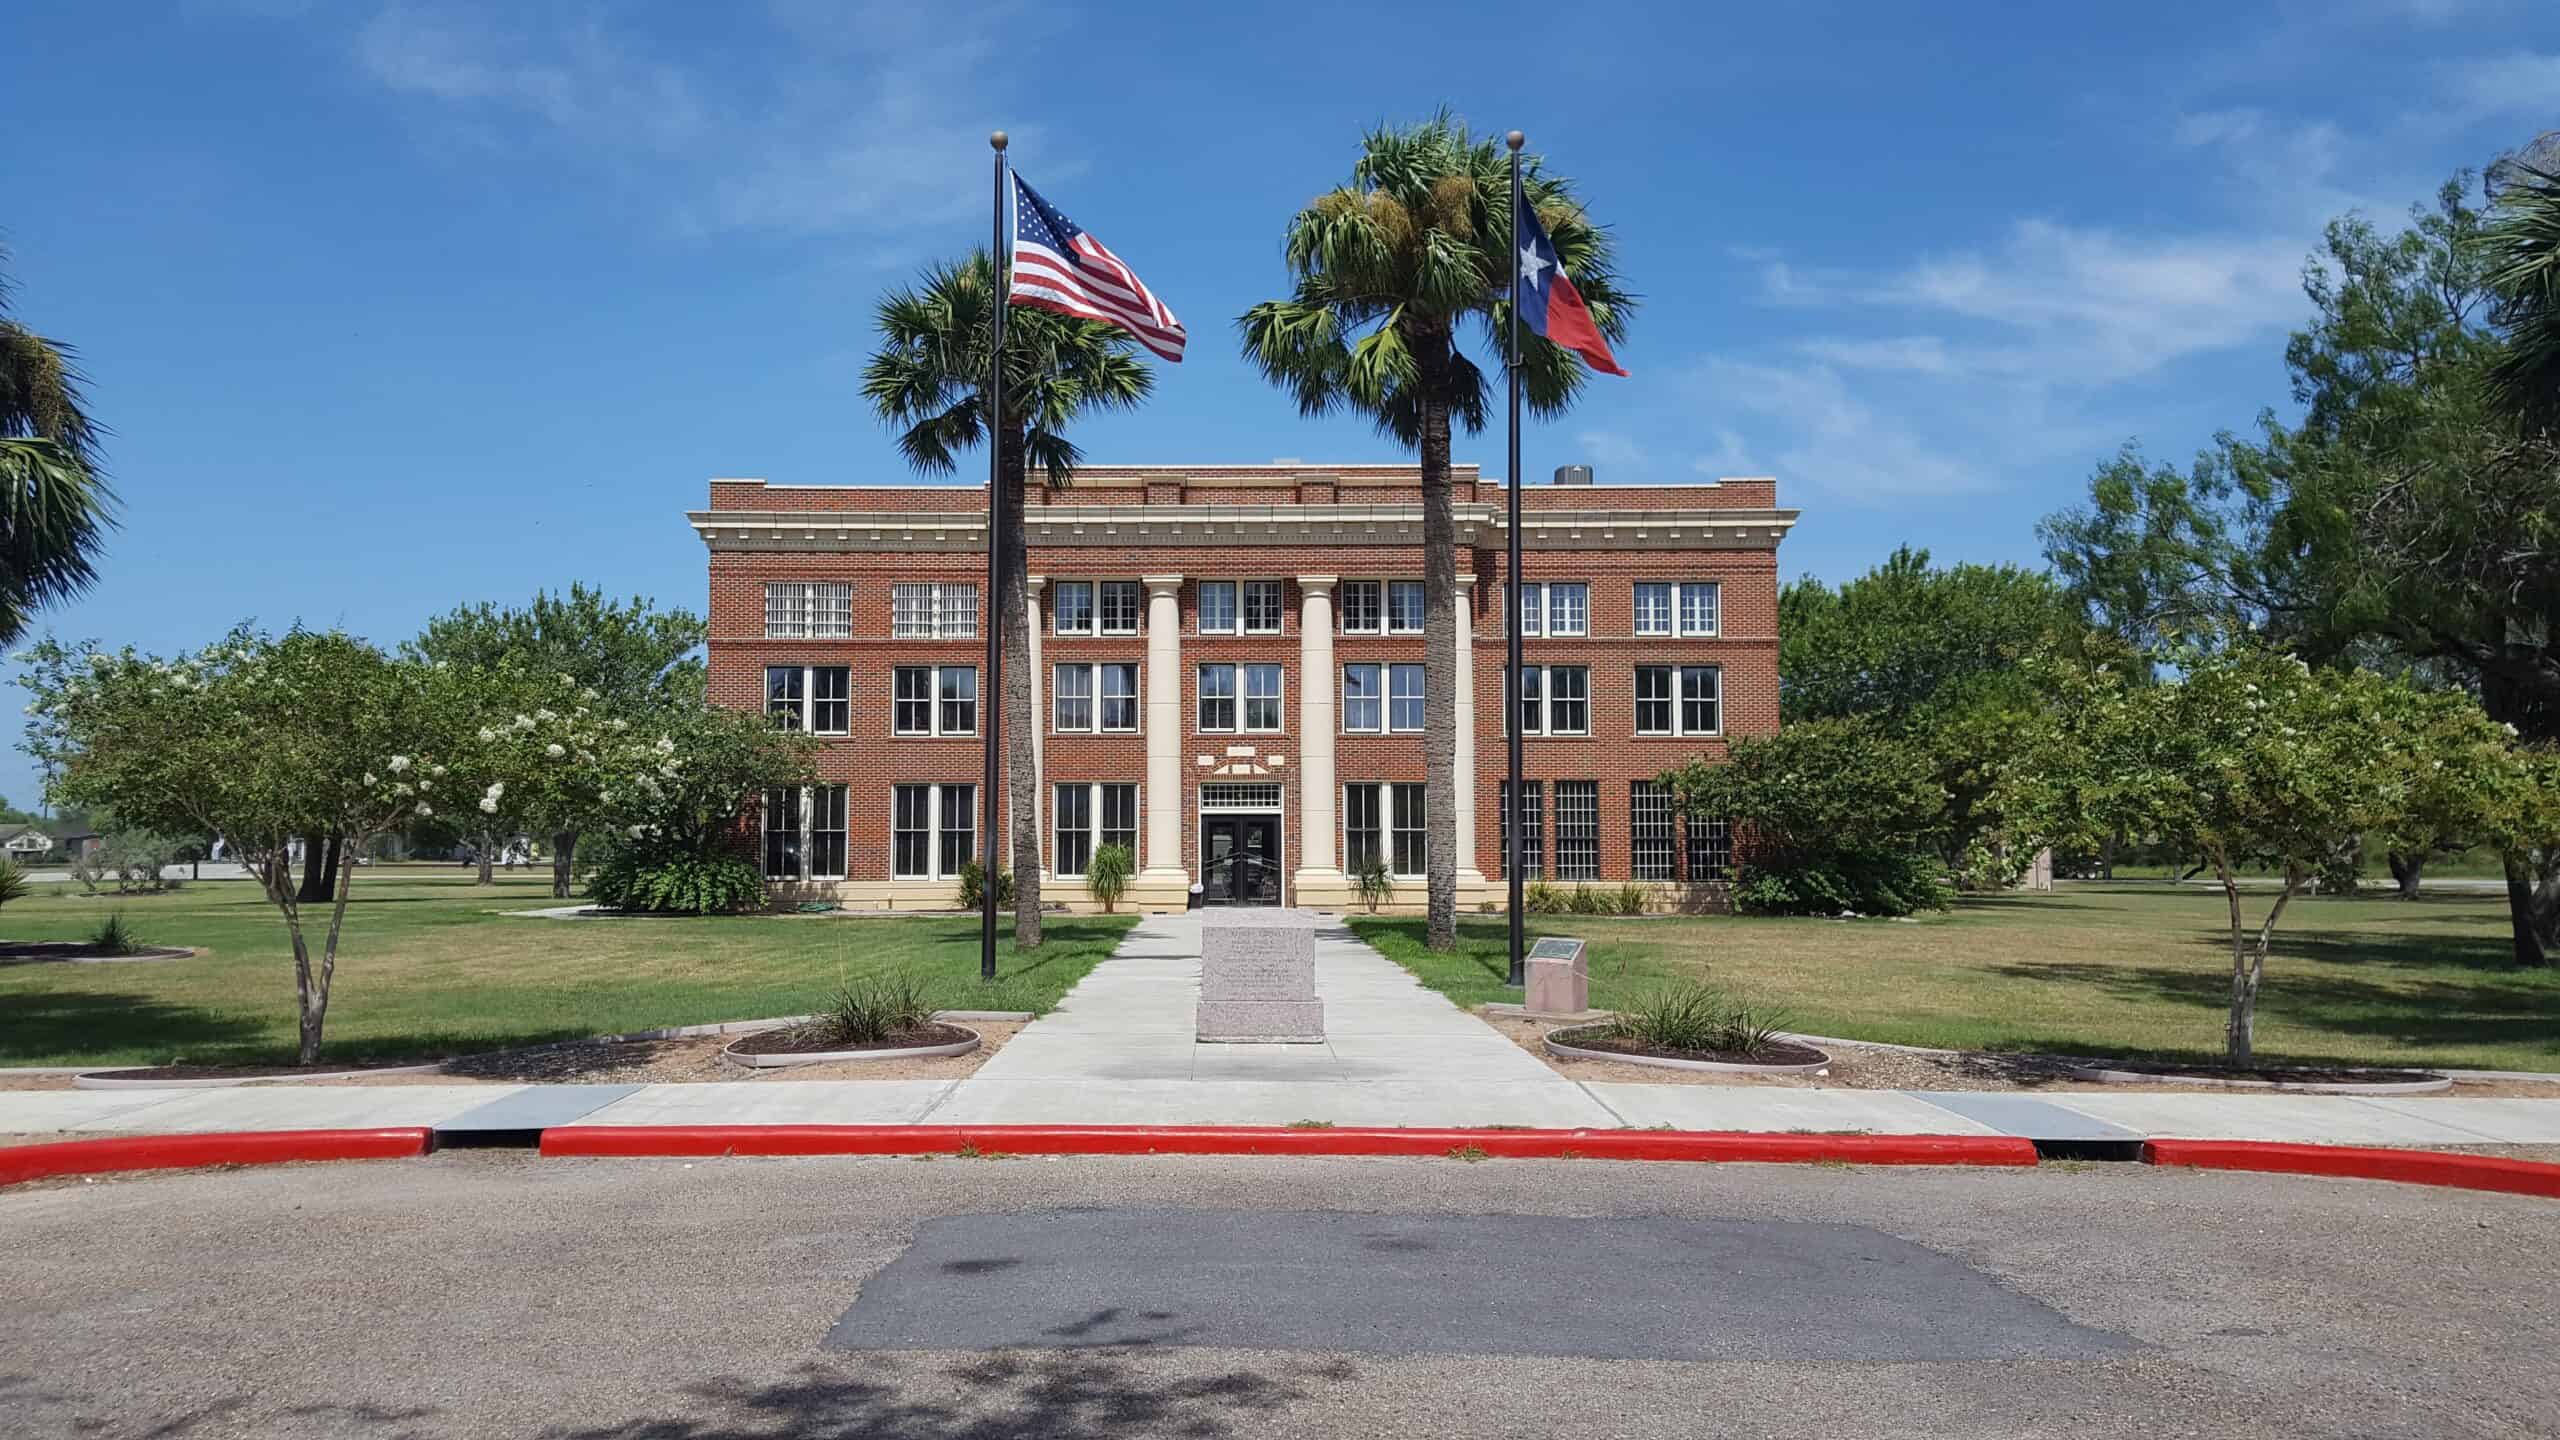 Kenedy County Courthouse, Sarita, TX by 25or6to4